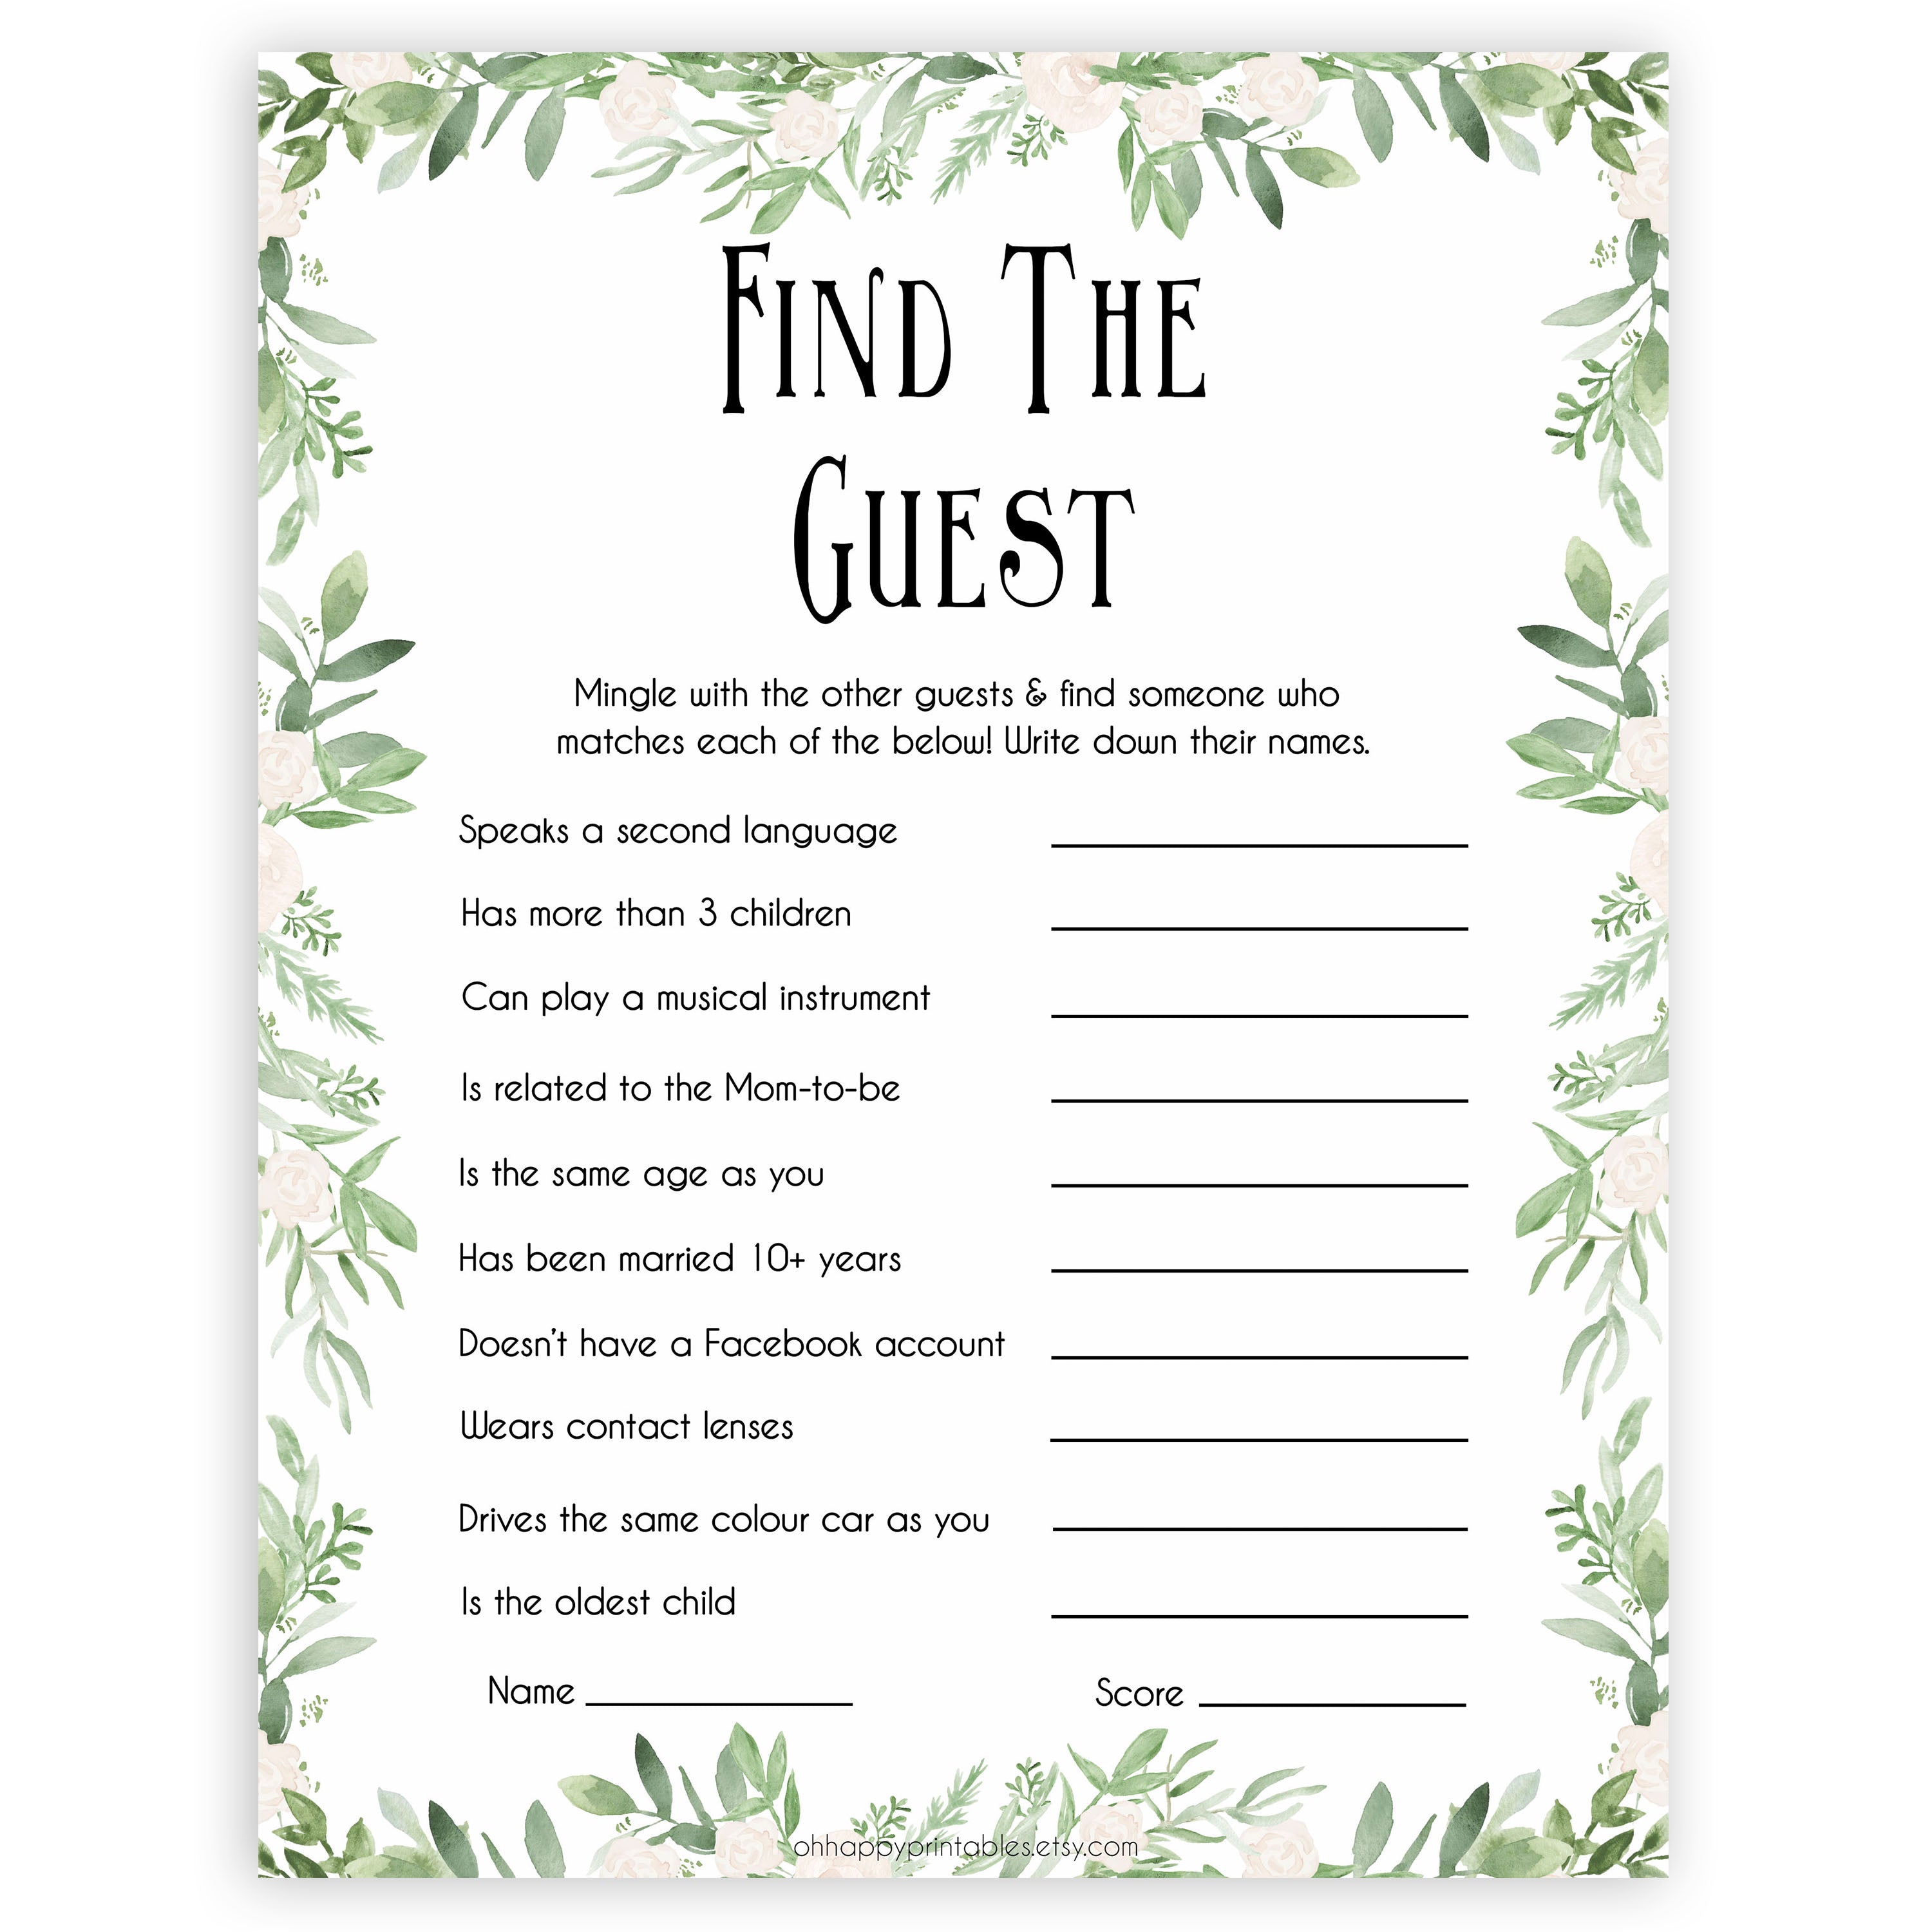 Greenery Find The Guest Baby Shower Game, Find the Guest, Ice Breaker Game, Baby Shower Games, Botanical Baby Shower, Find the Guest, printable baby shower games, fun baby shower games, popular baby shower games